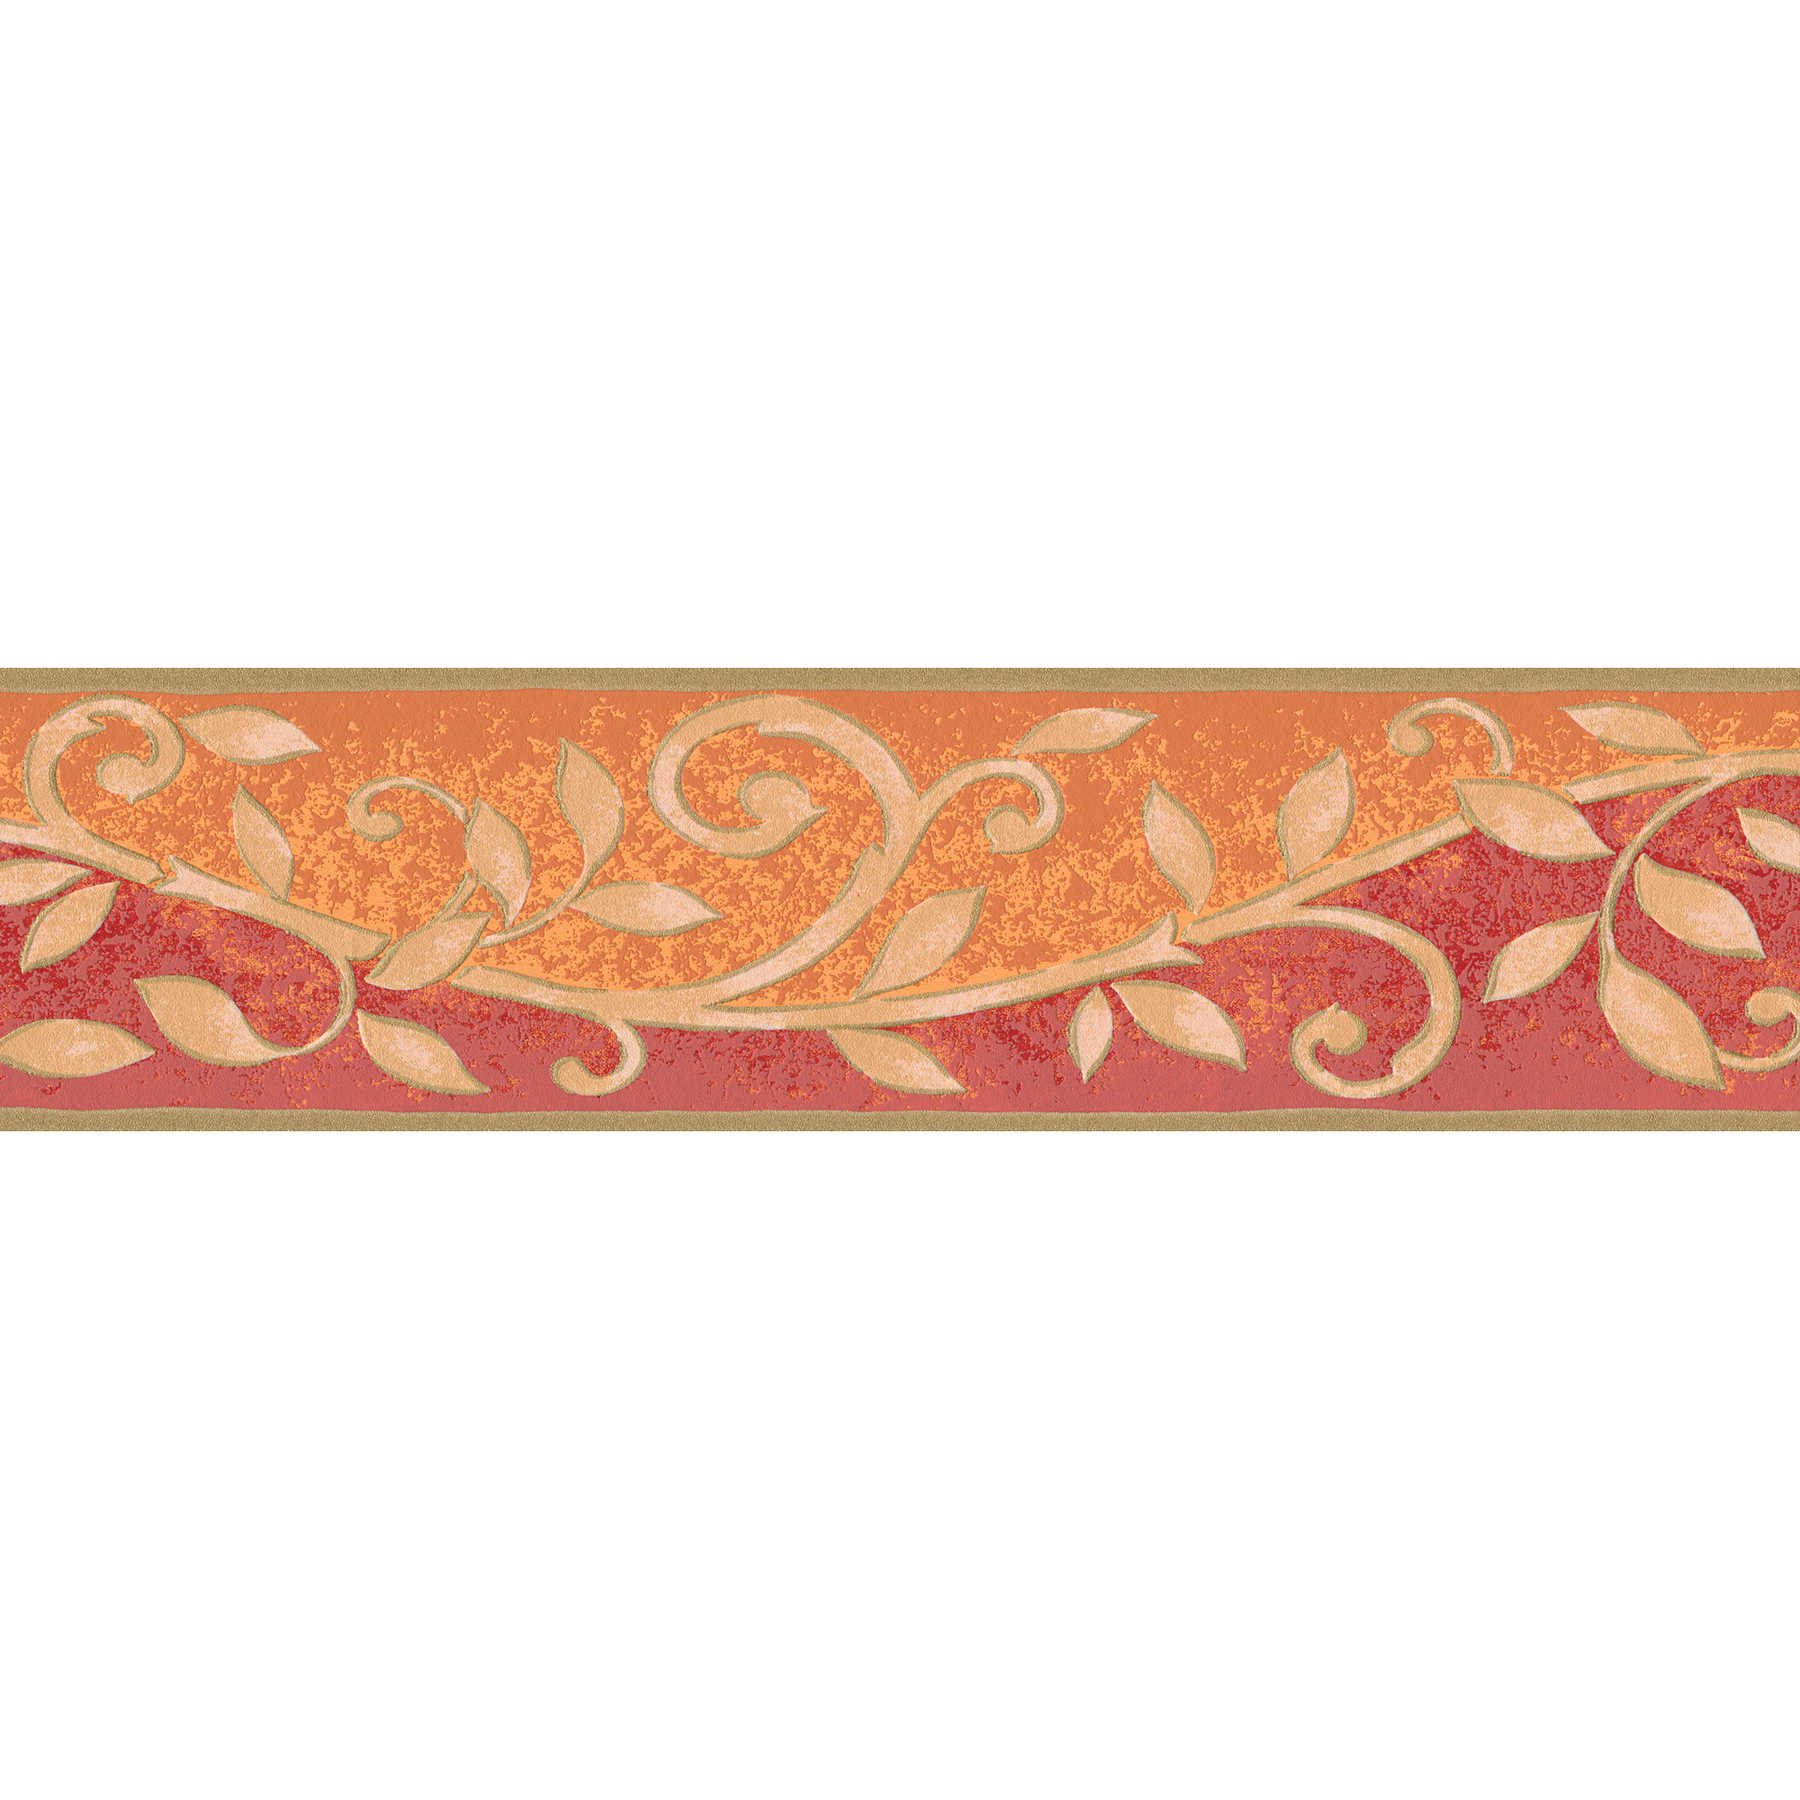         Border with leaf tendrils and gold accents - orange, red, beige
    